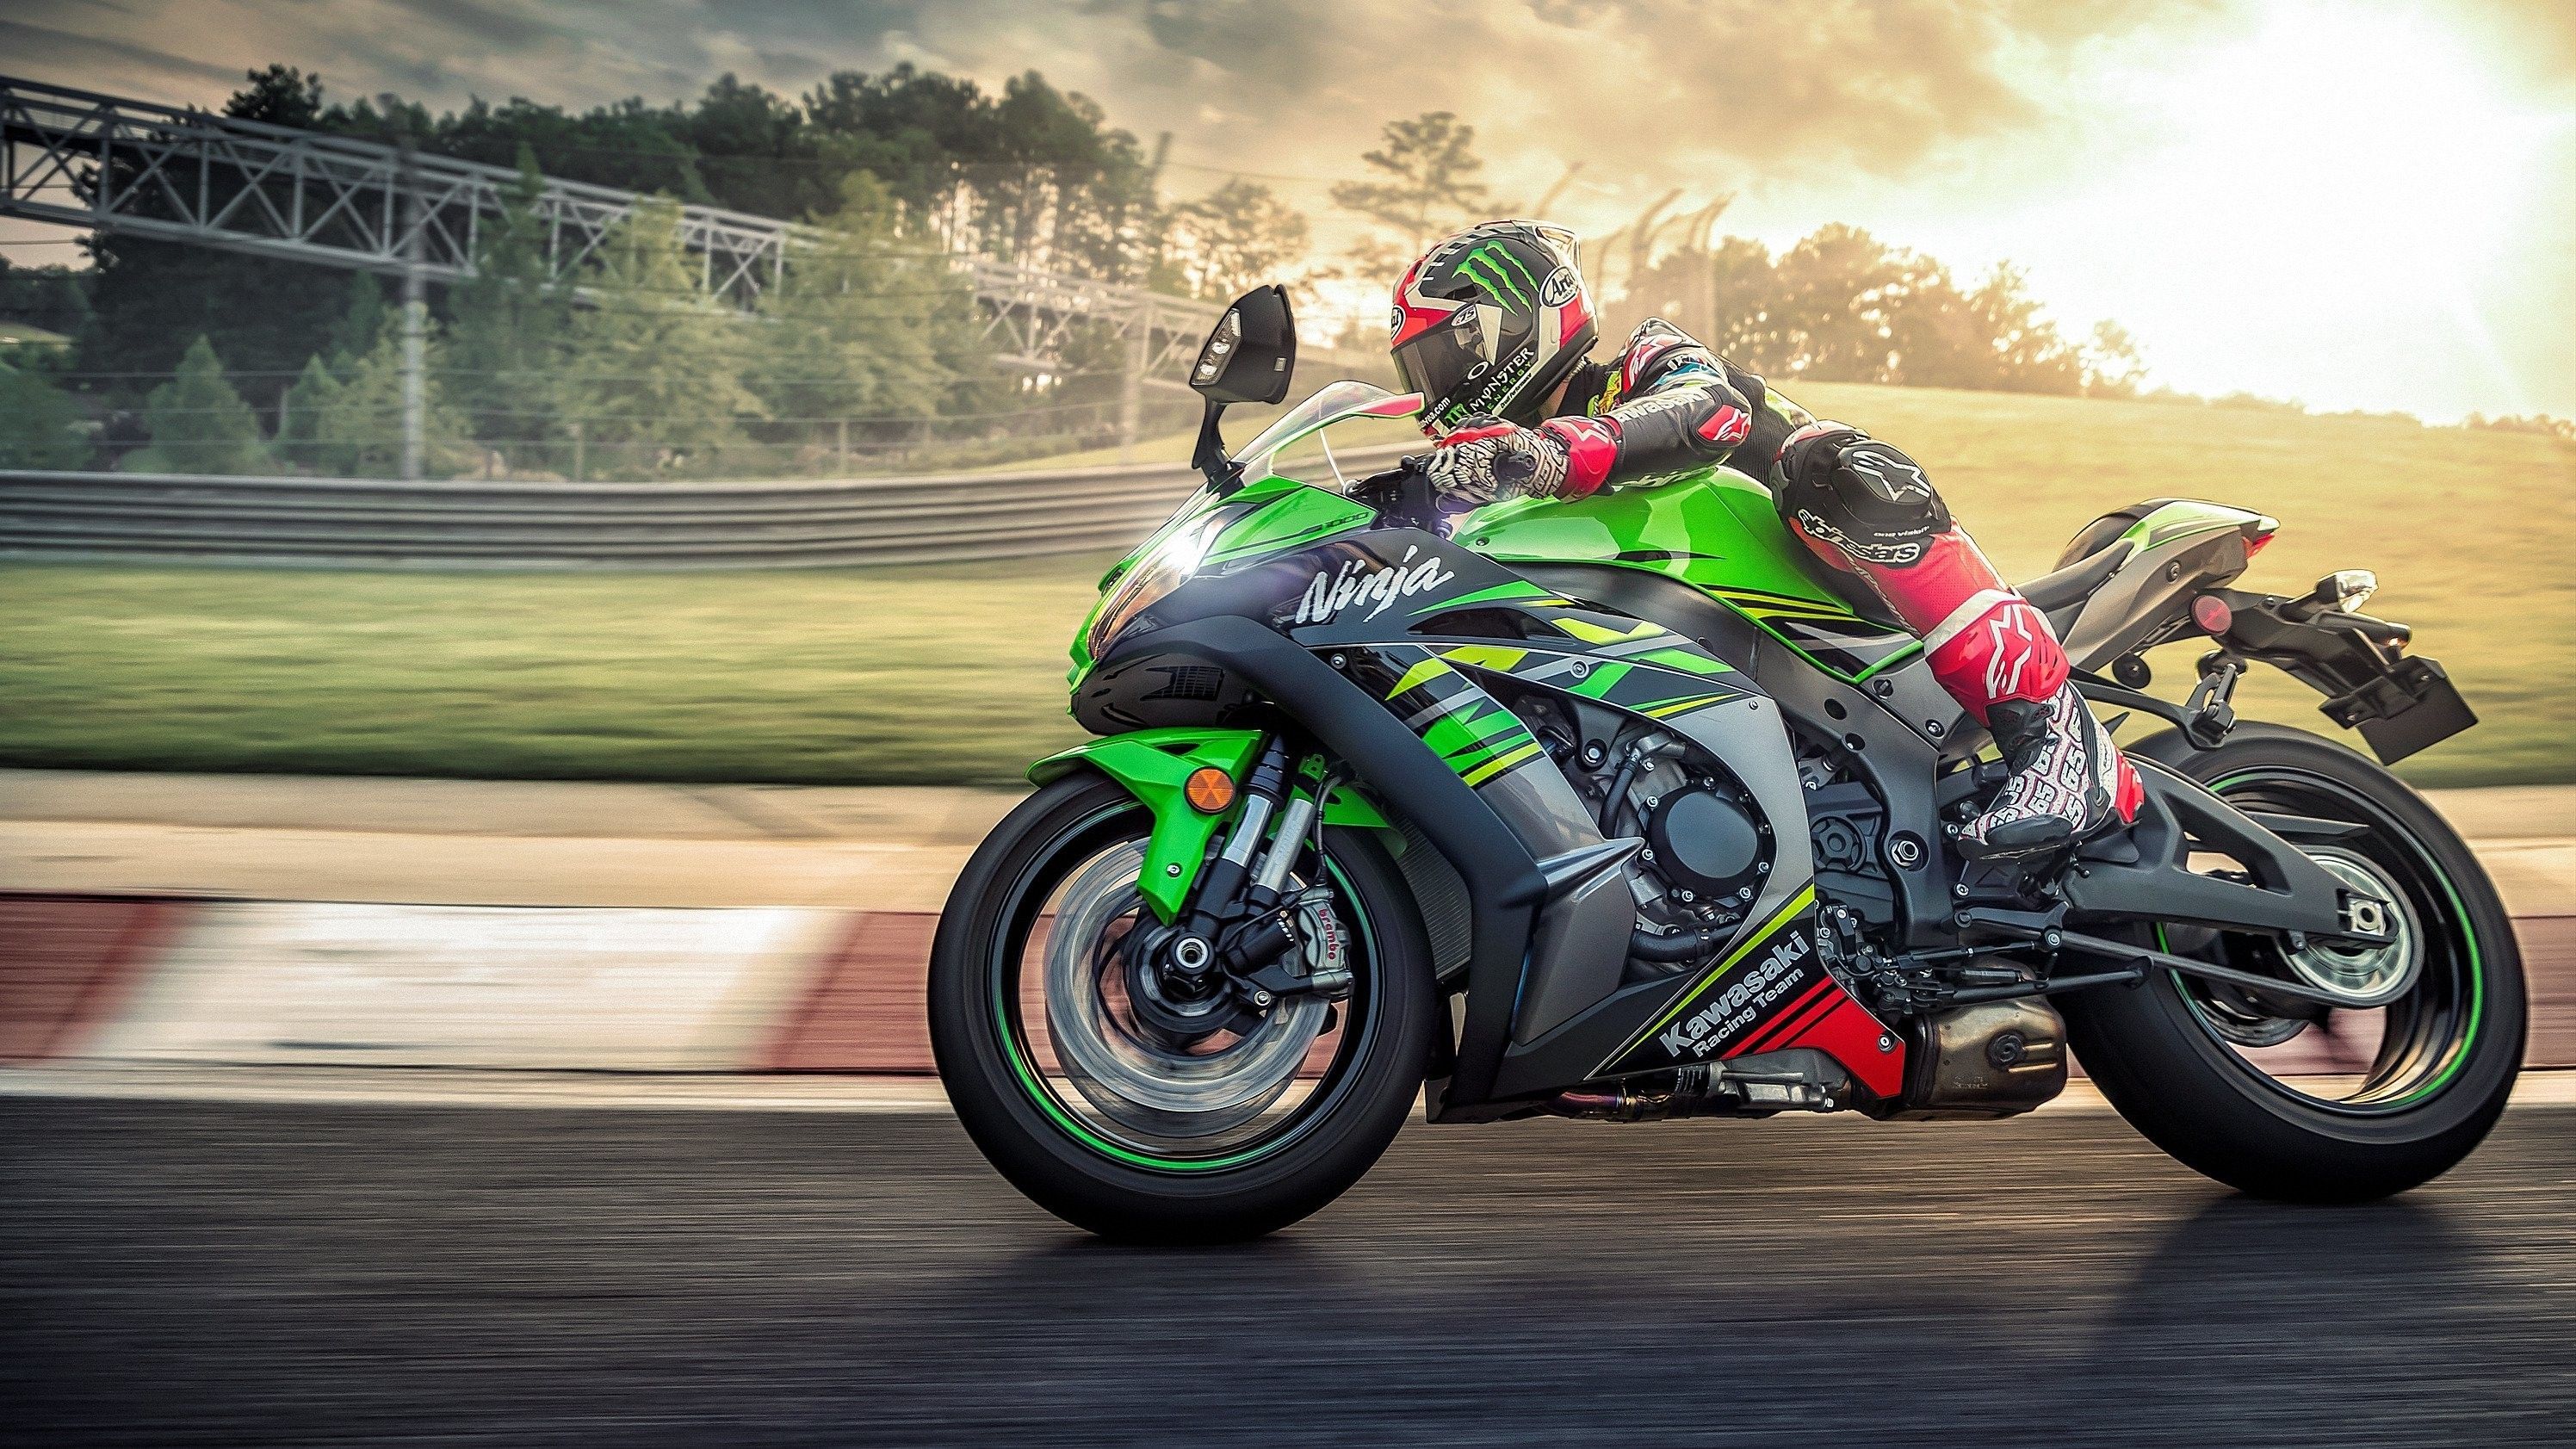 Kawasaki Showroom Bangalore  Kawasaki Zx10R lets face the thrill    Kawasaki Zx  10R experience the true racing power with 4 stroke liquid  cool engine with high performance brake and